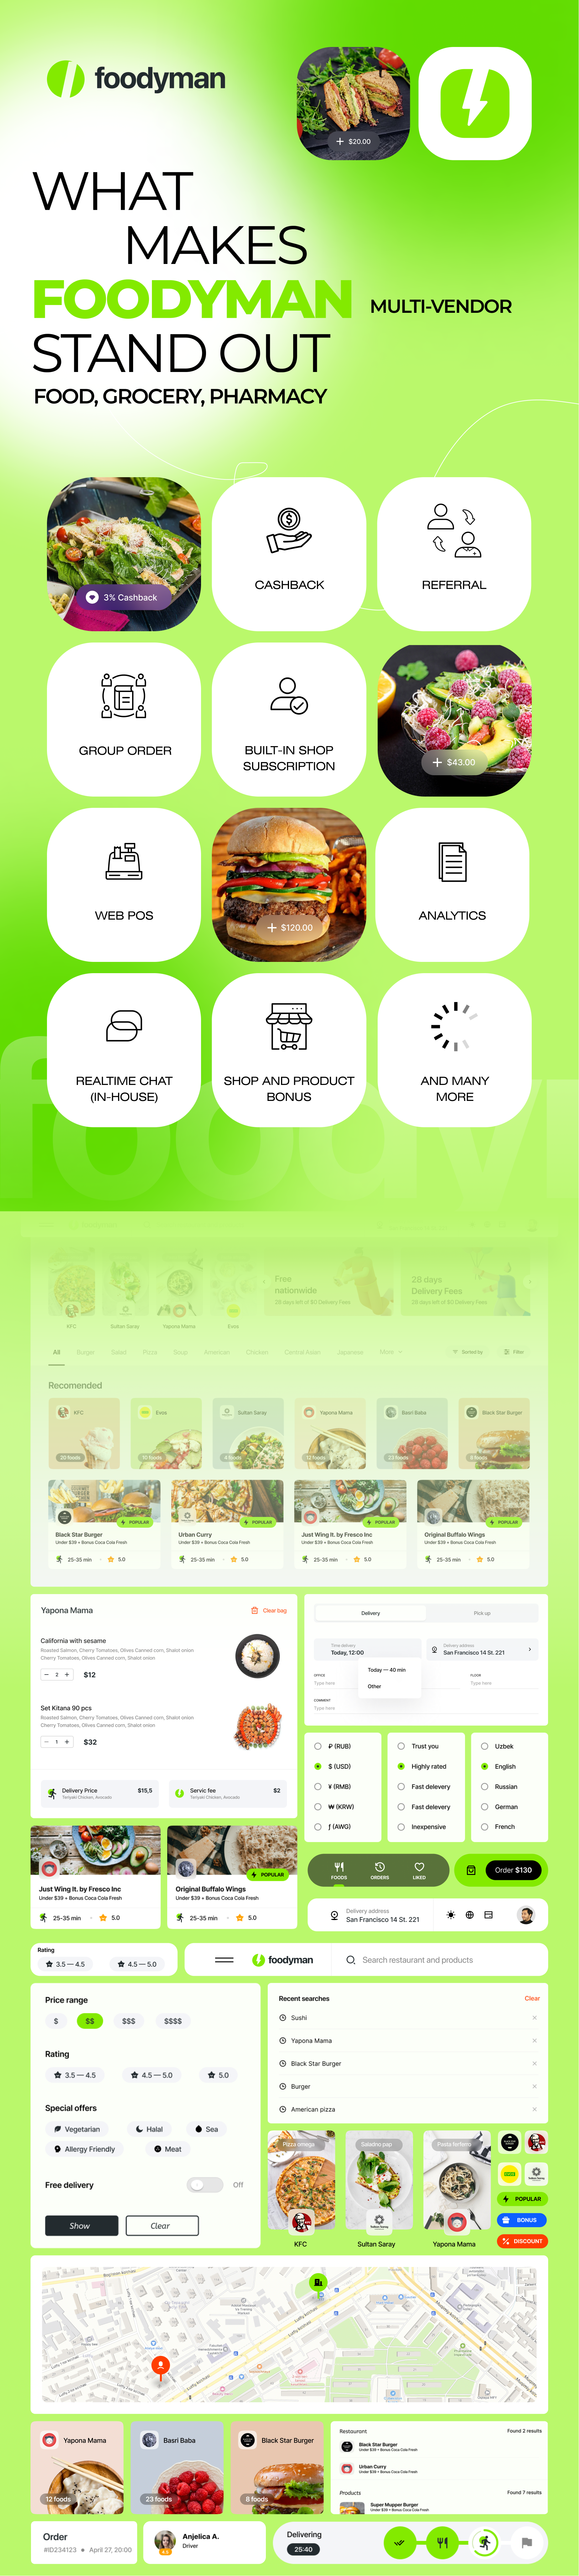 Foodyman - Multi-Restaurant Food and Grocery Ordering and Delivery Marketplace (Web & Customer Apps) - 8